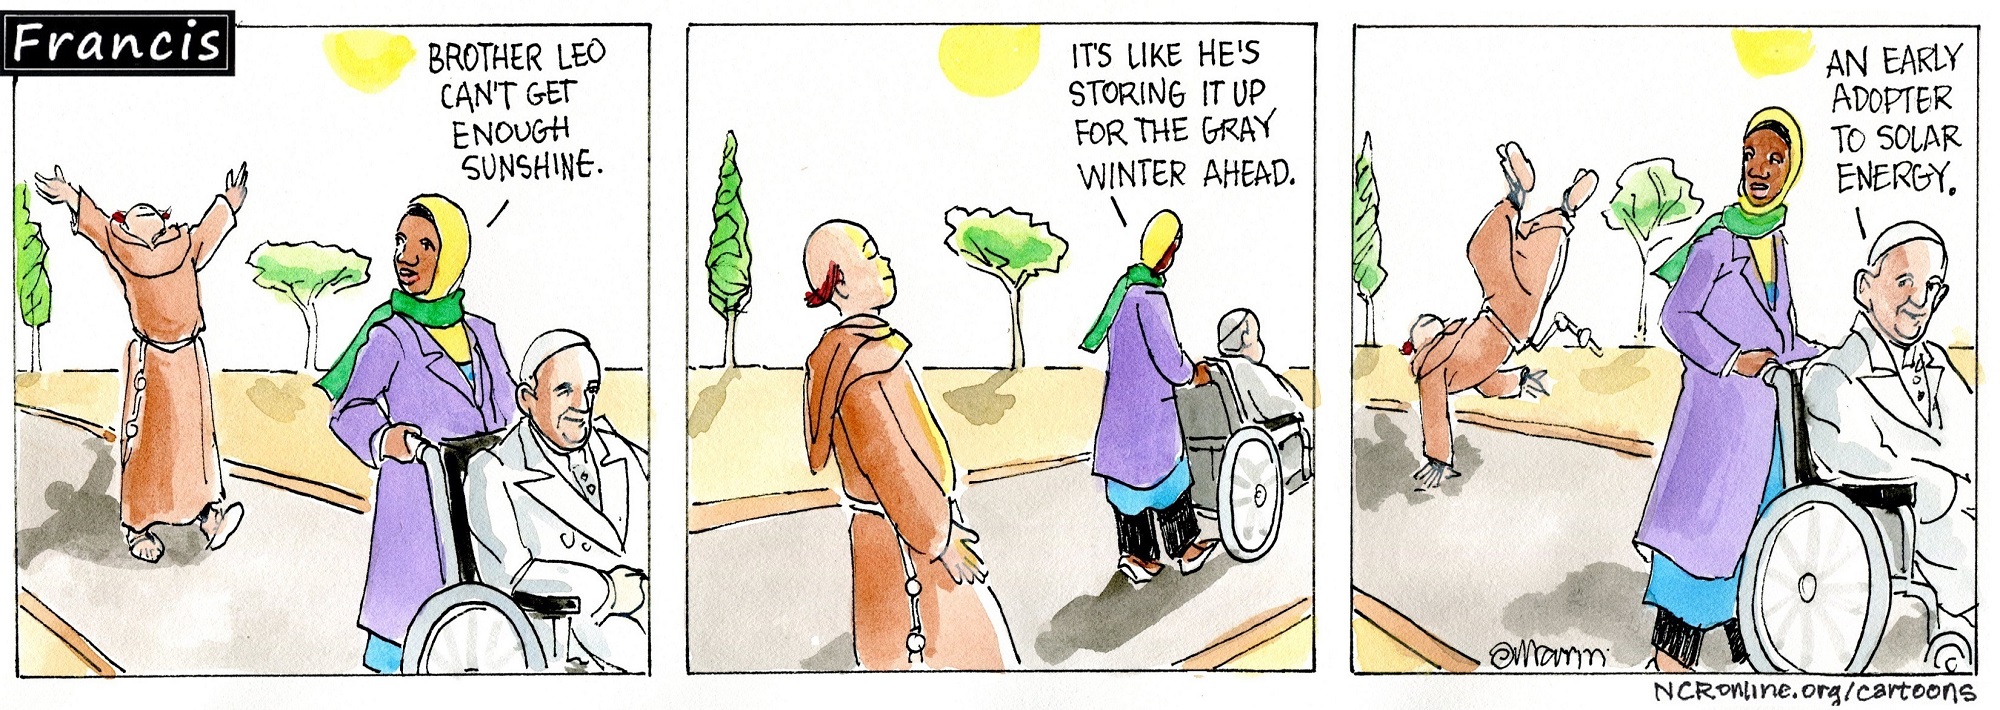 Francis, the comic strip: Brother Leo can't get enough sunshine.